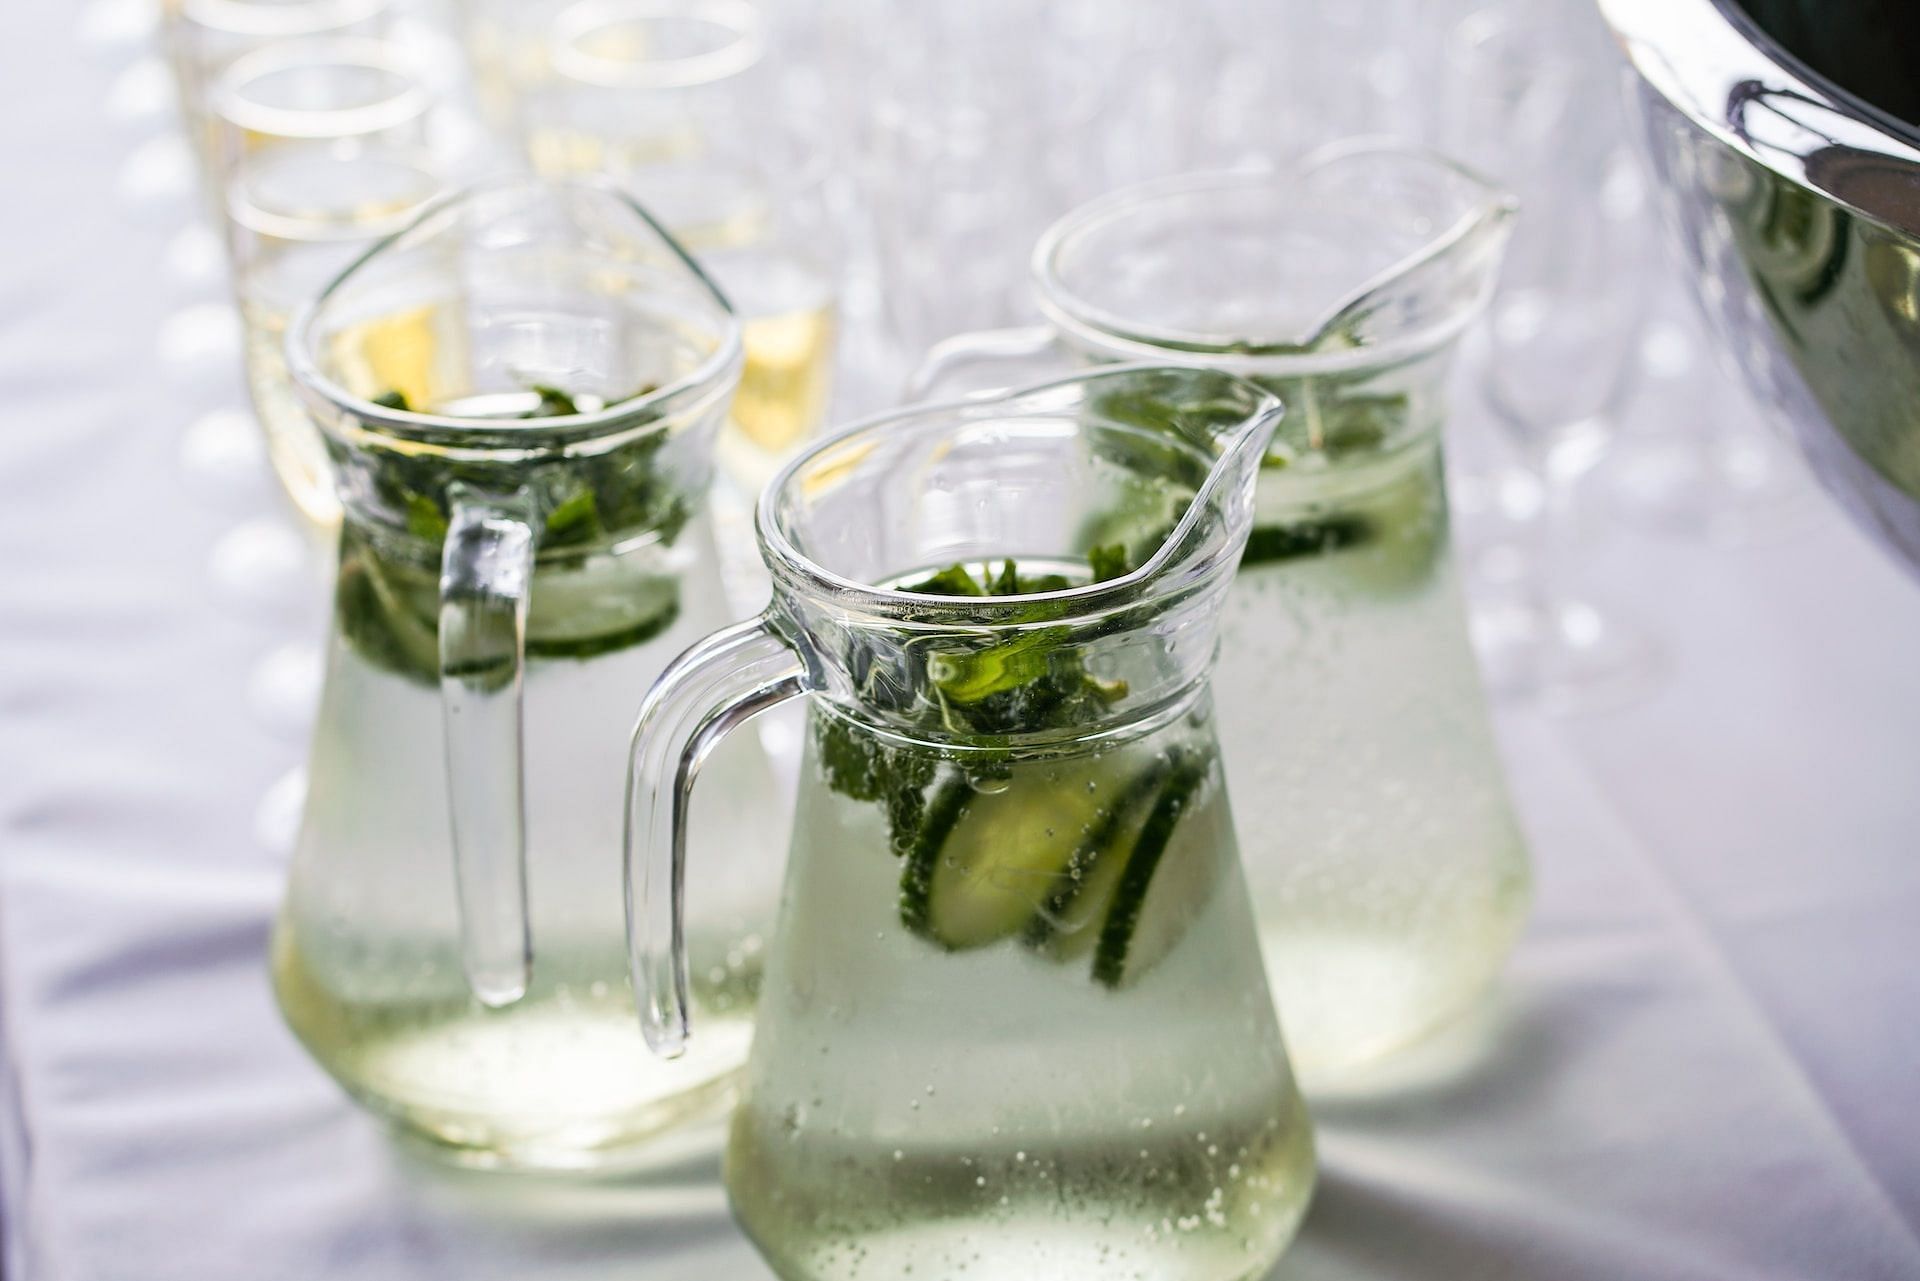 Cucumber-infused water is good for health. (Photo via Unsplash/Yomex Owo)